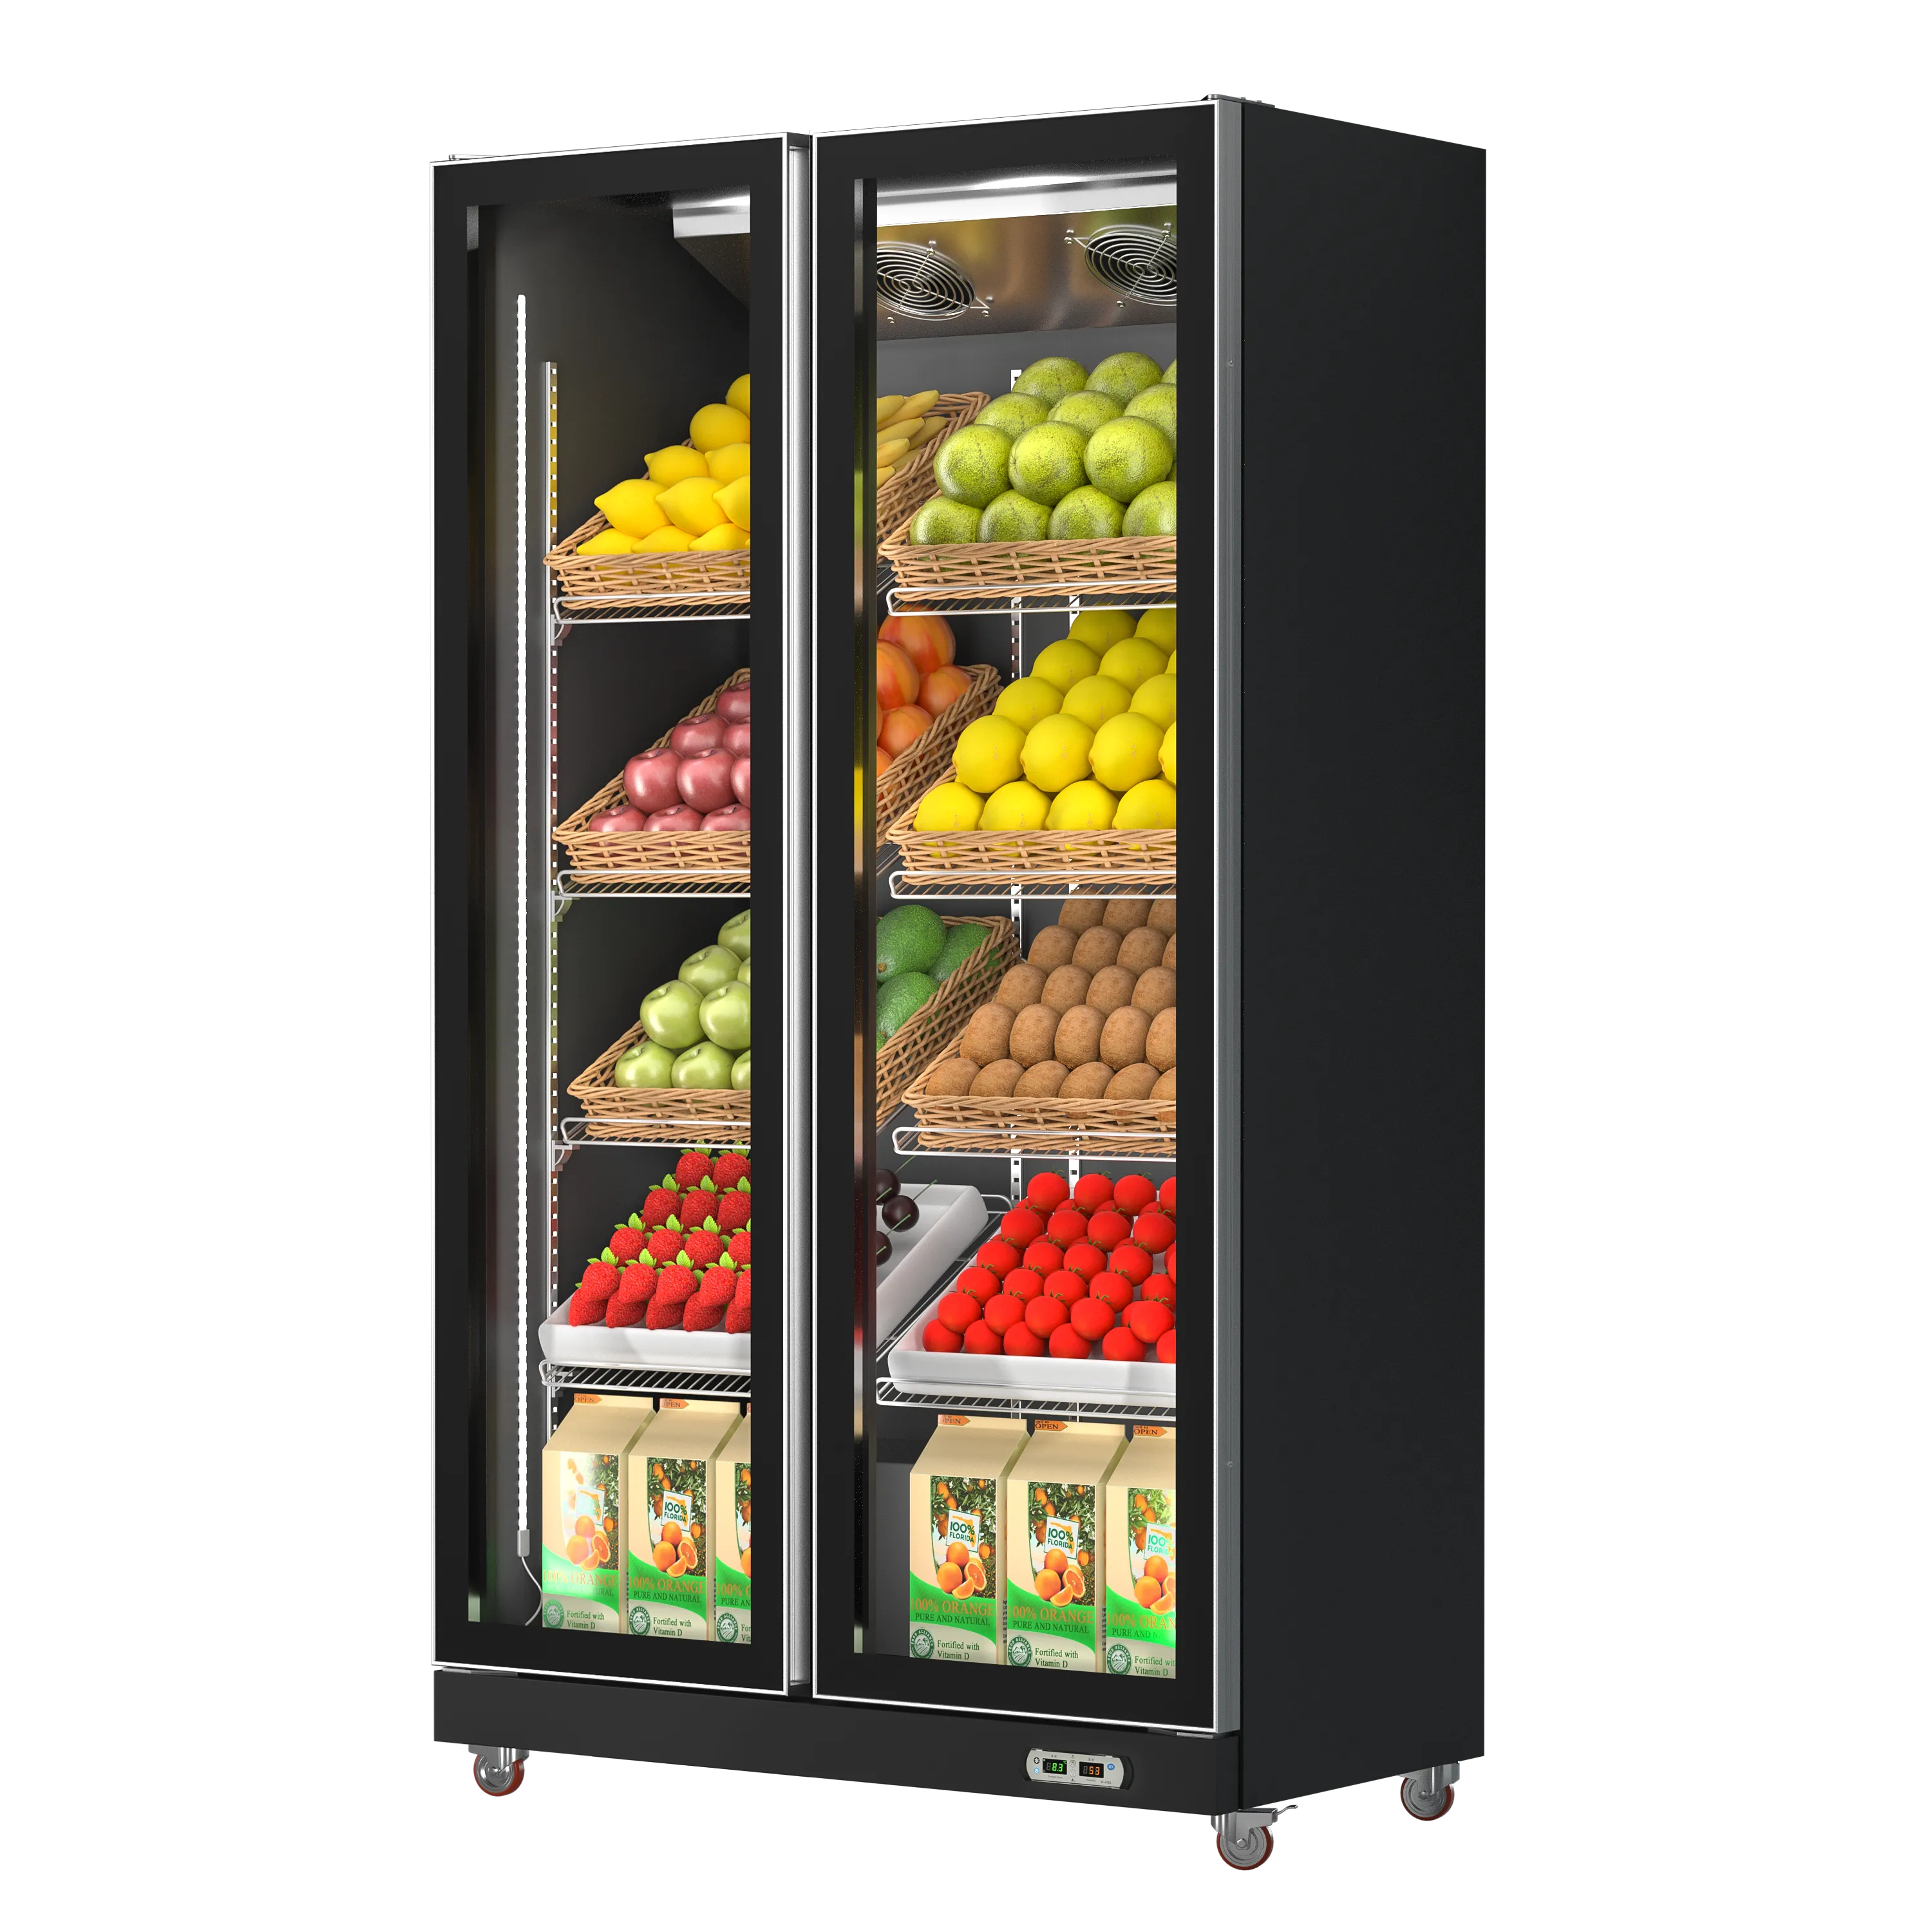 Introduction to Commercial Refrigeration Equipment